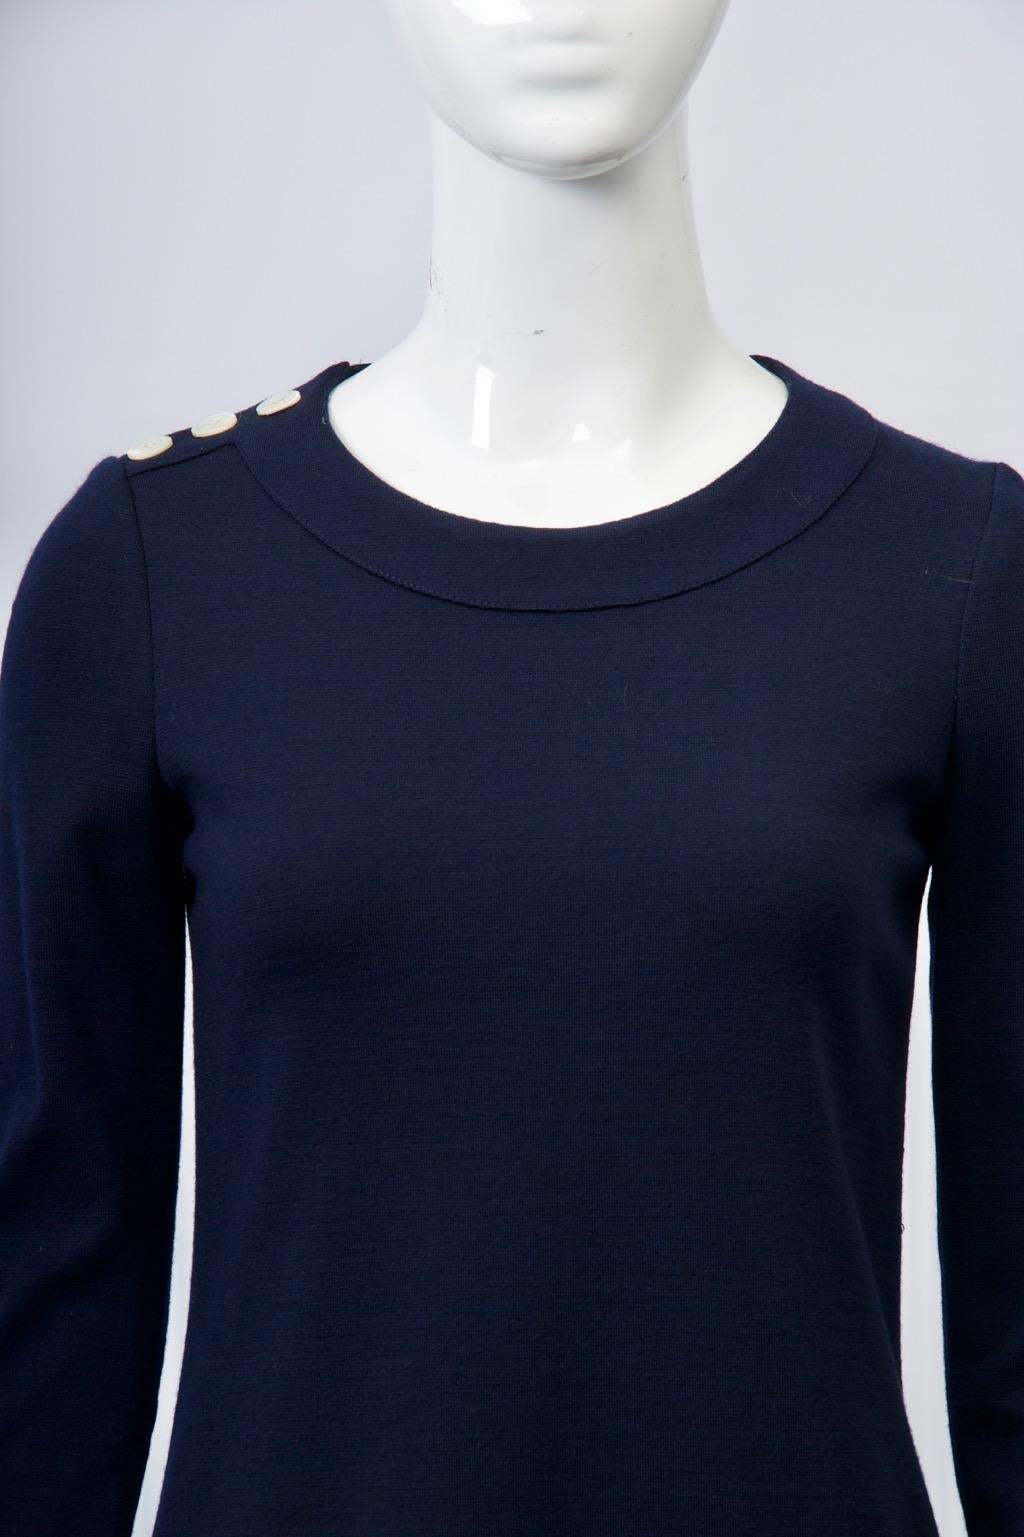 Sonia Rykiel 1970s Navy Knit Ensemble In Good Condition For Sale In Alford, MA